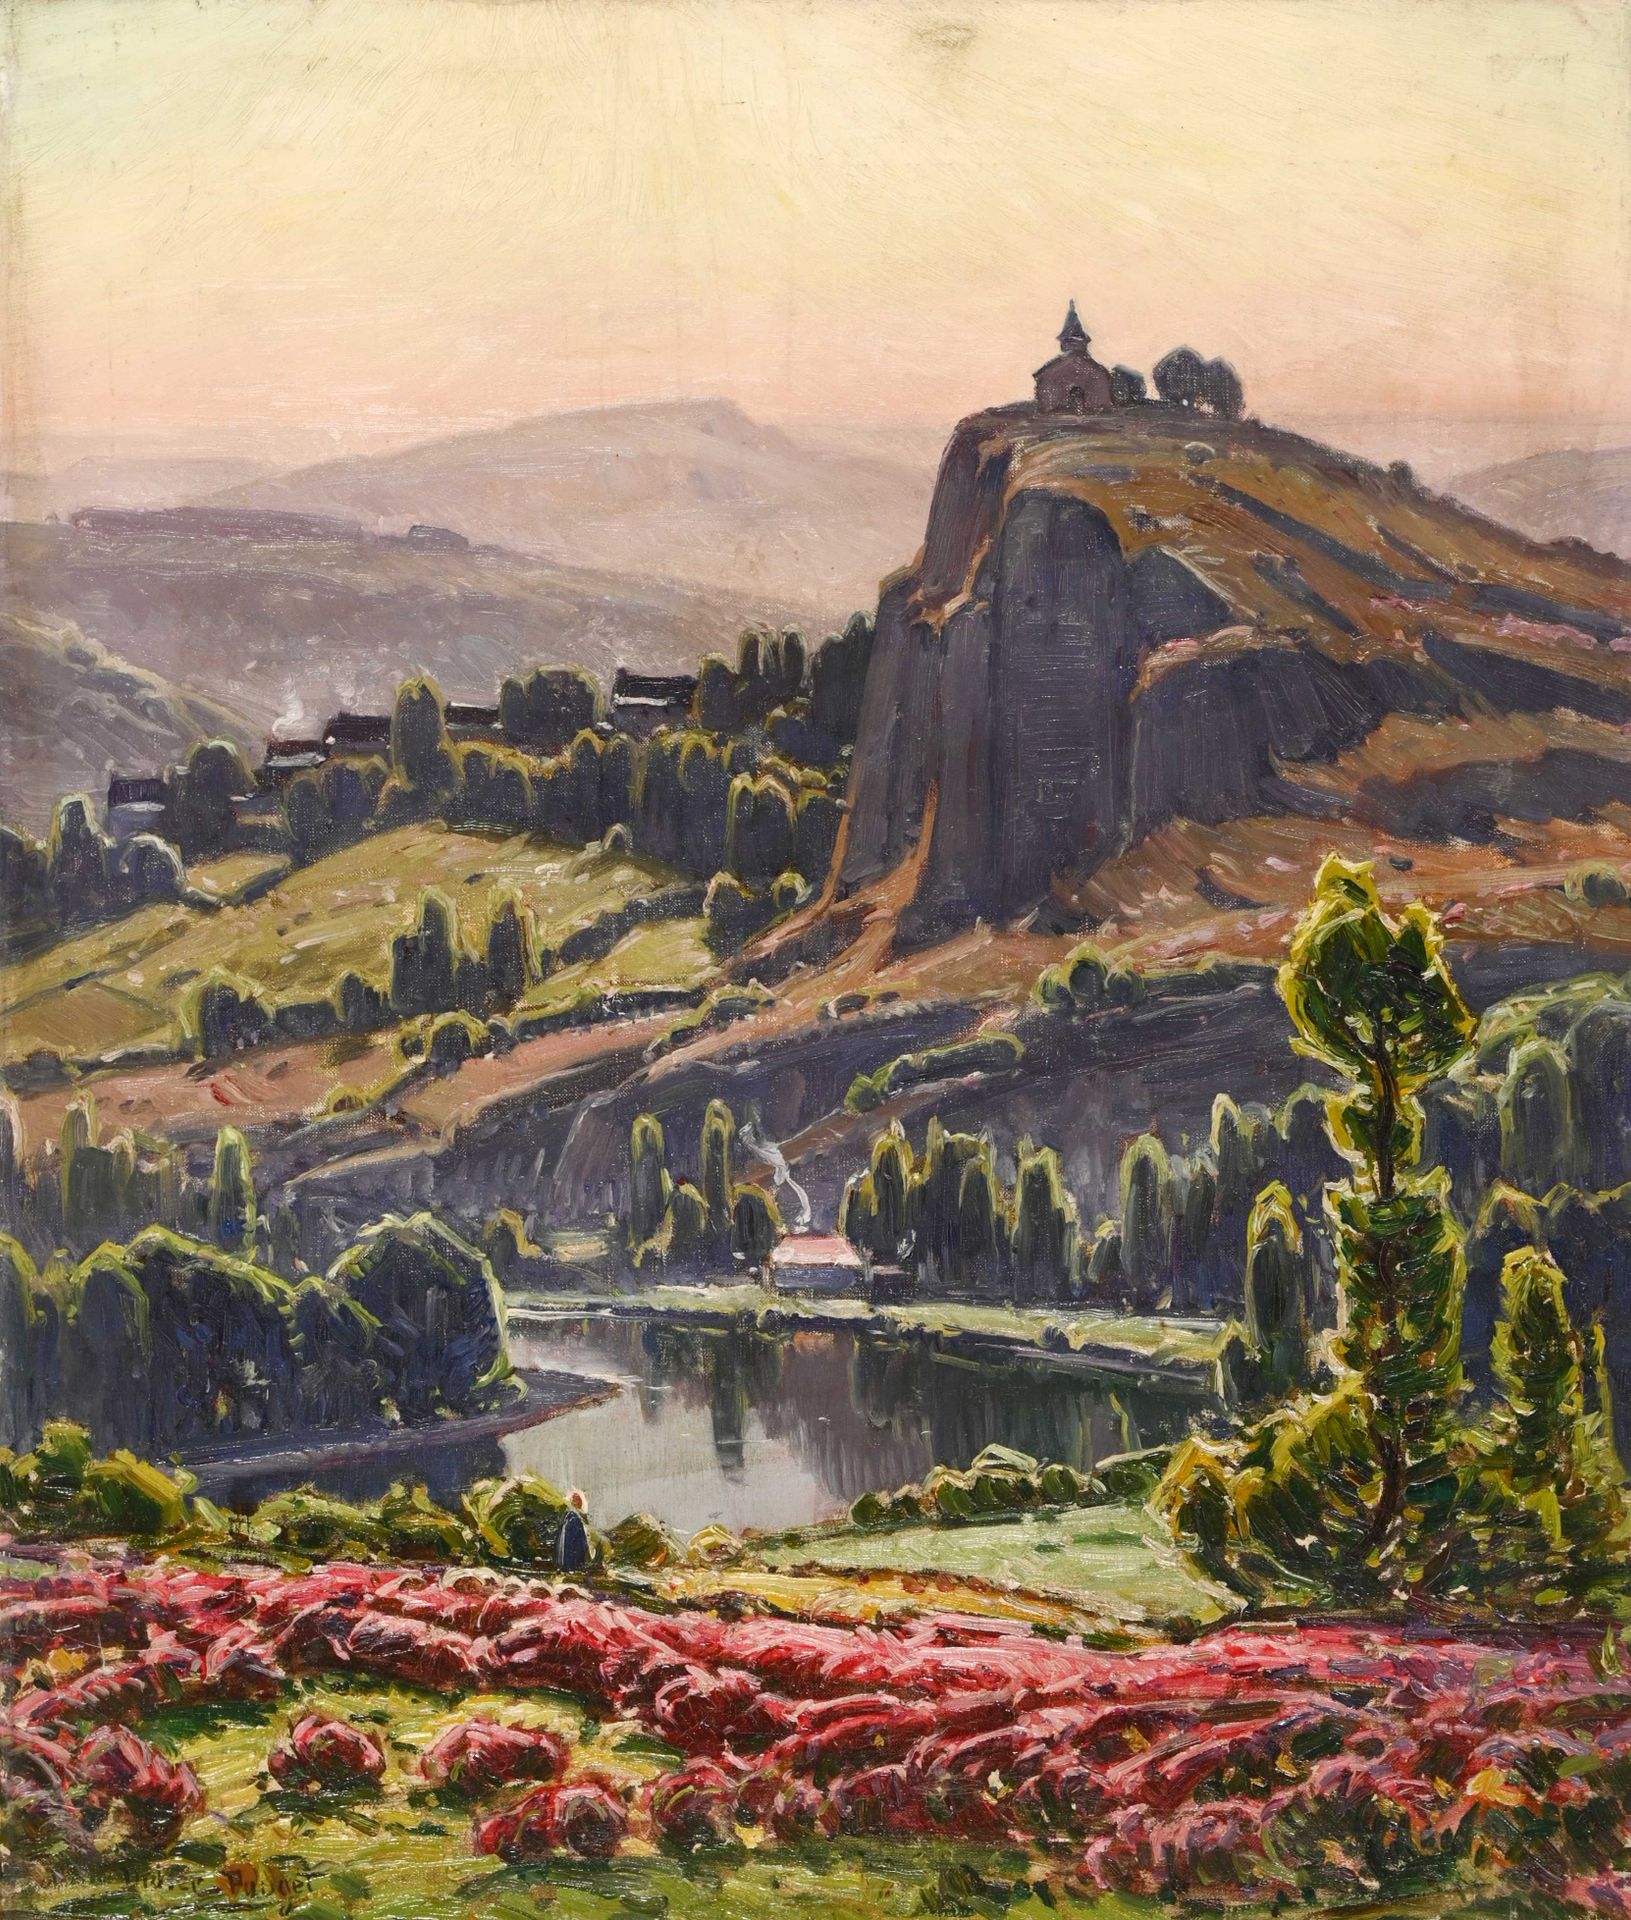 Null William DIDIER-POUGET (1864-1959) "Valle del Aveyron" hst sbg 55x45